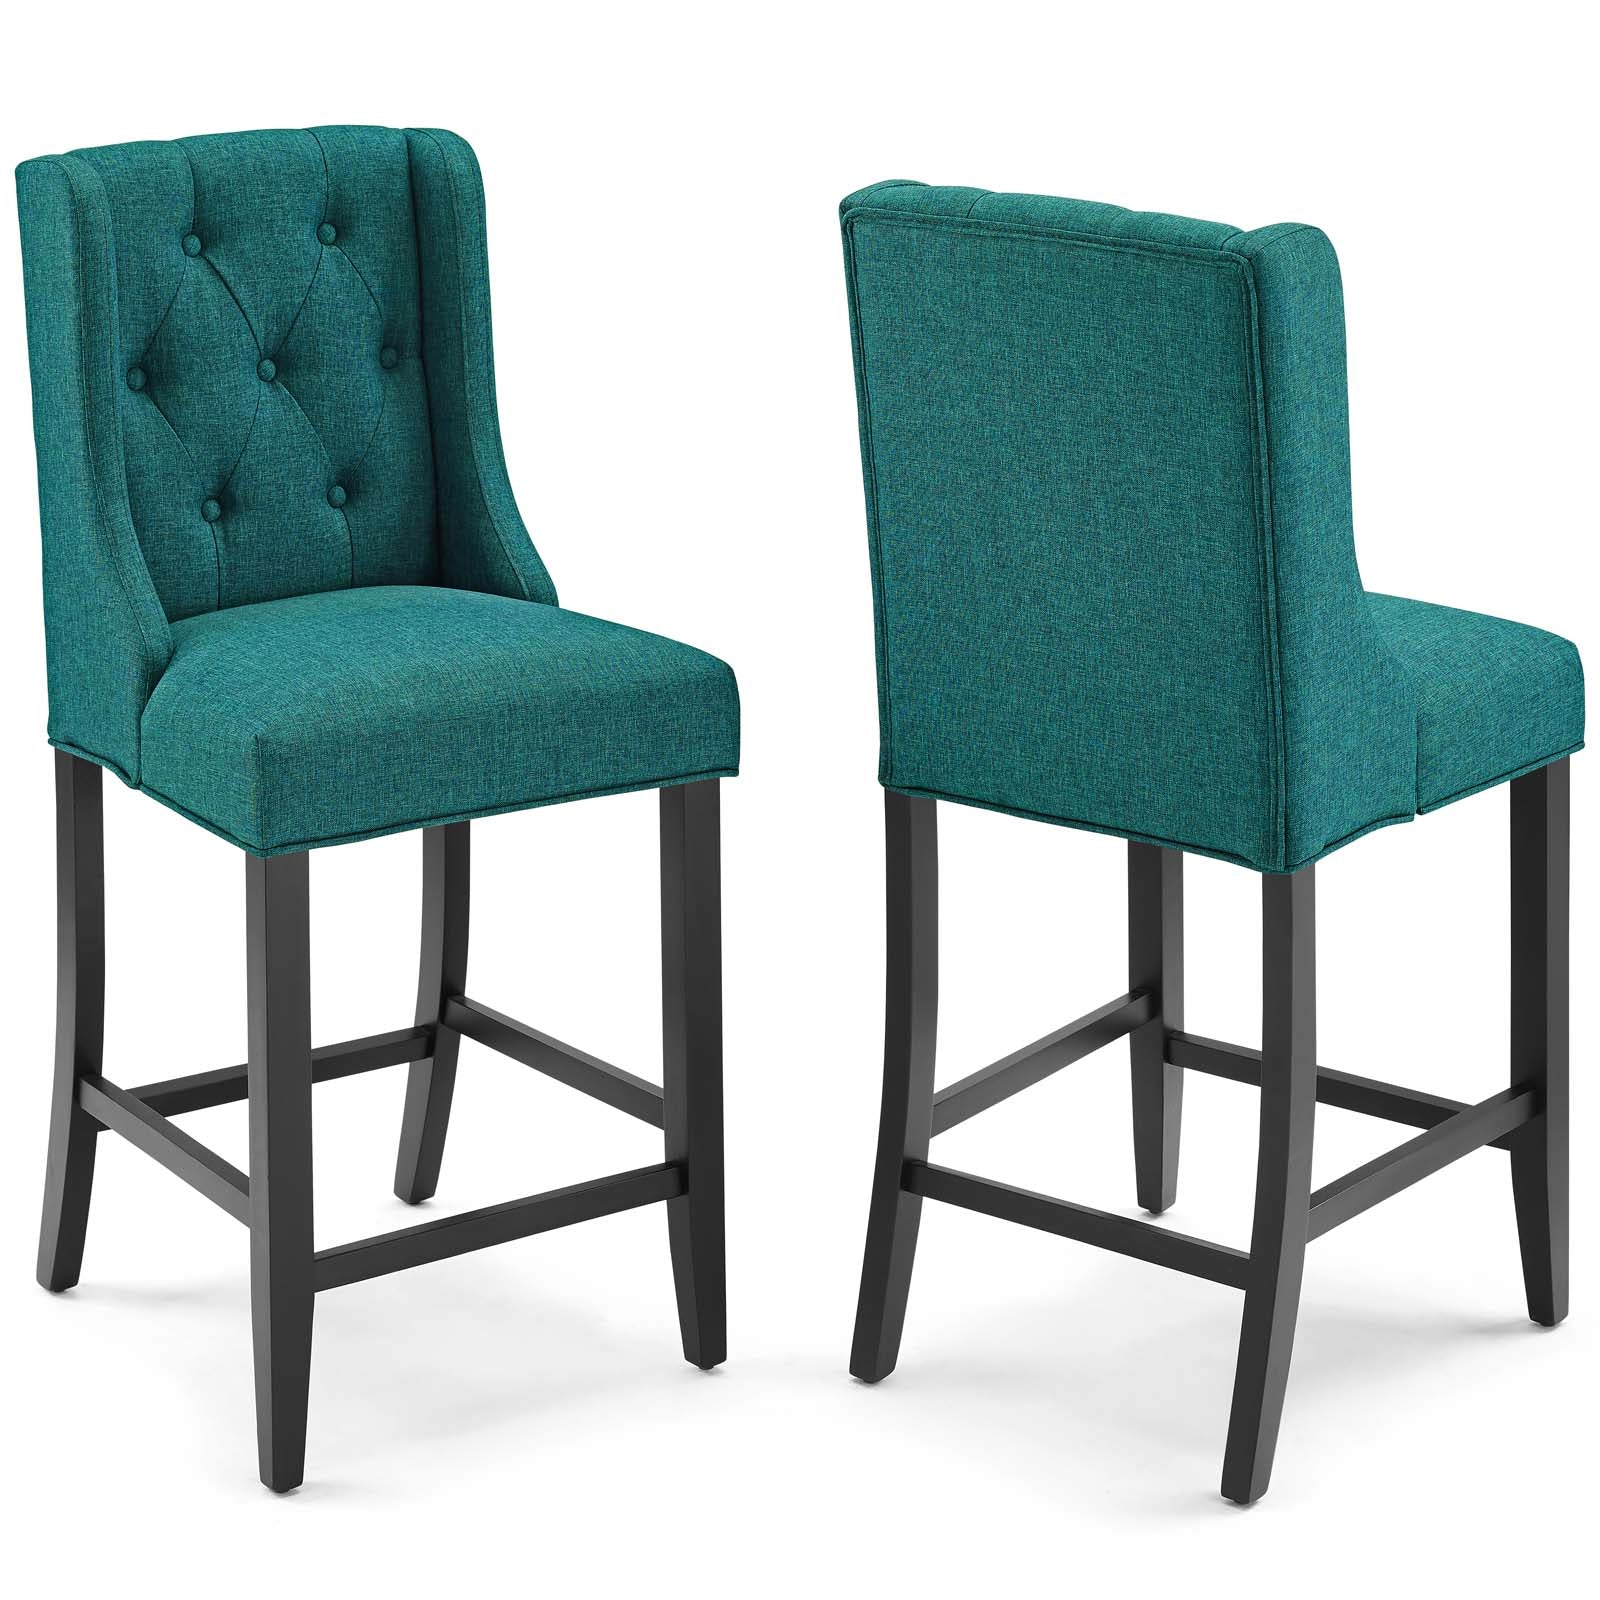 Modway Barstools - Baronet Counter Bar Stool Upholstered Fabric (Set of 2) Teal